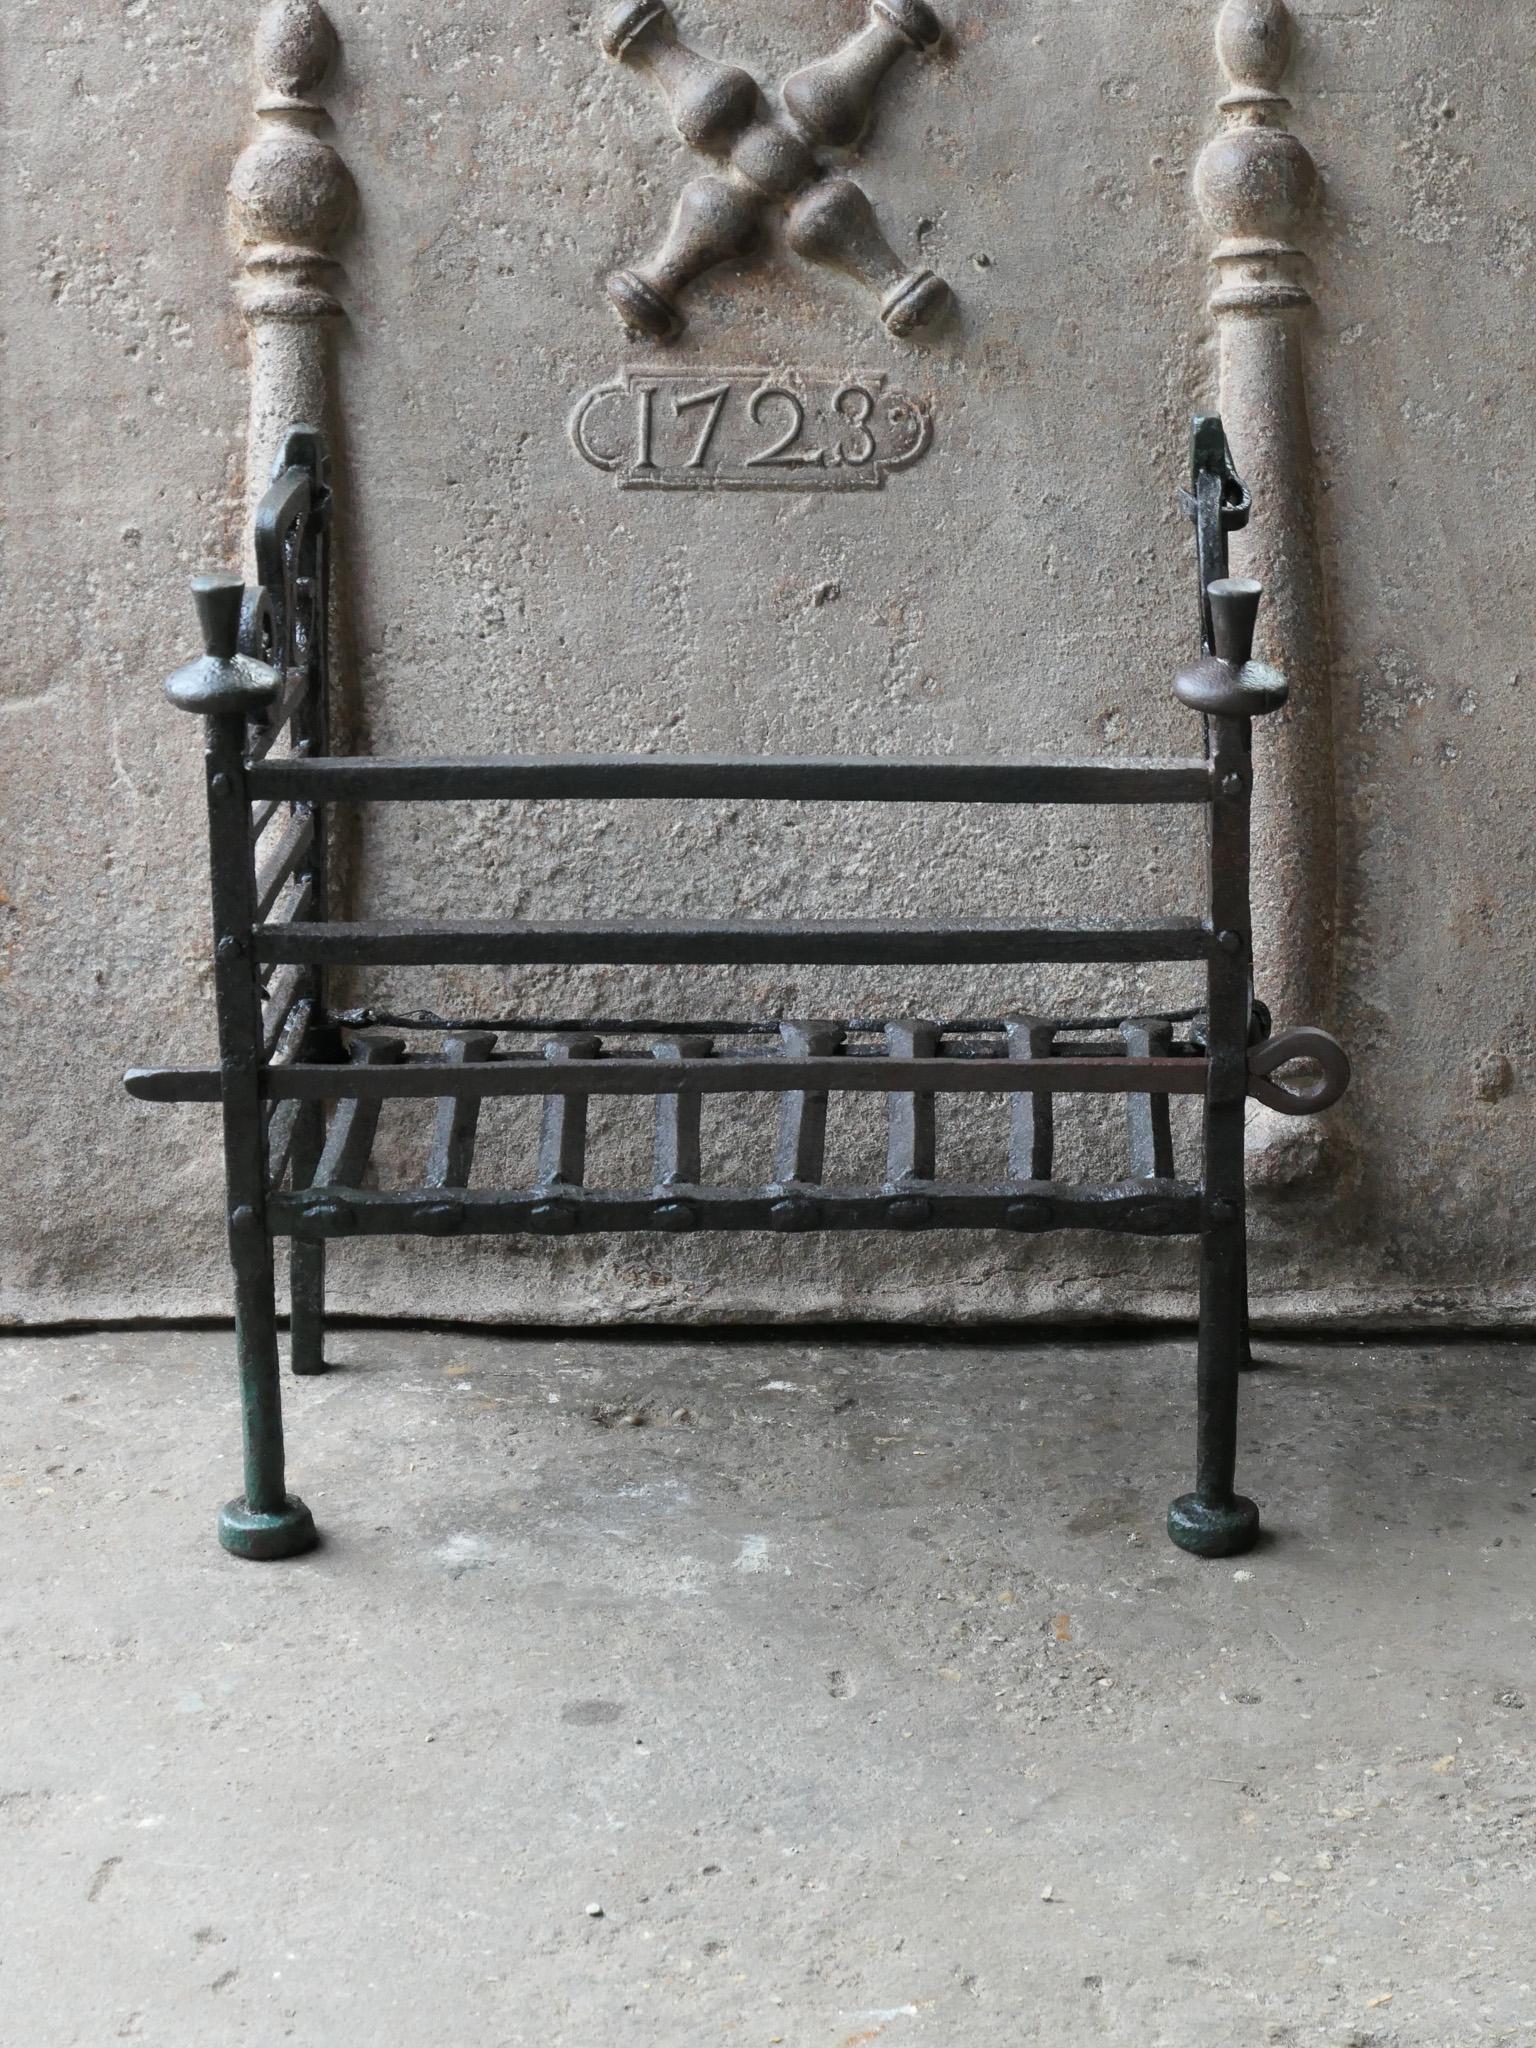 18th century French Louis XV fireplace grate, made of wrought iron. The basket is in a good condition and is fully functional. 

